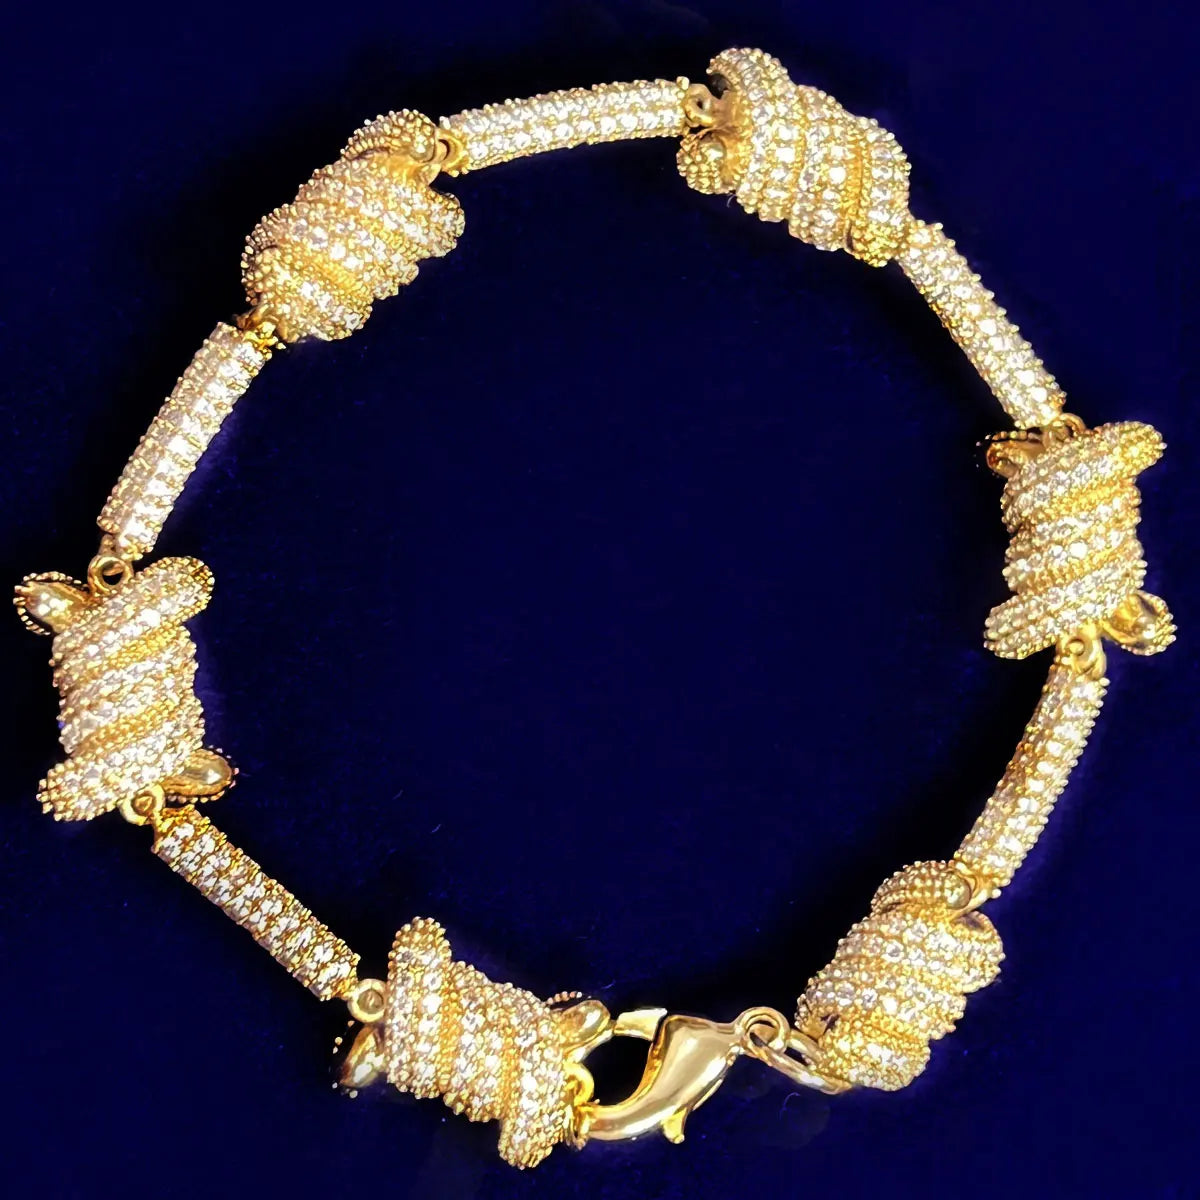 Iced Barbed Wire Bracelet - Gold/White Gold